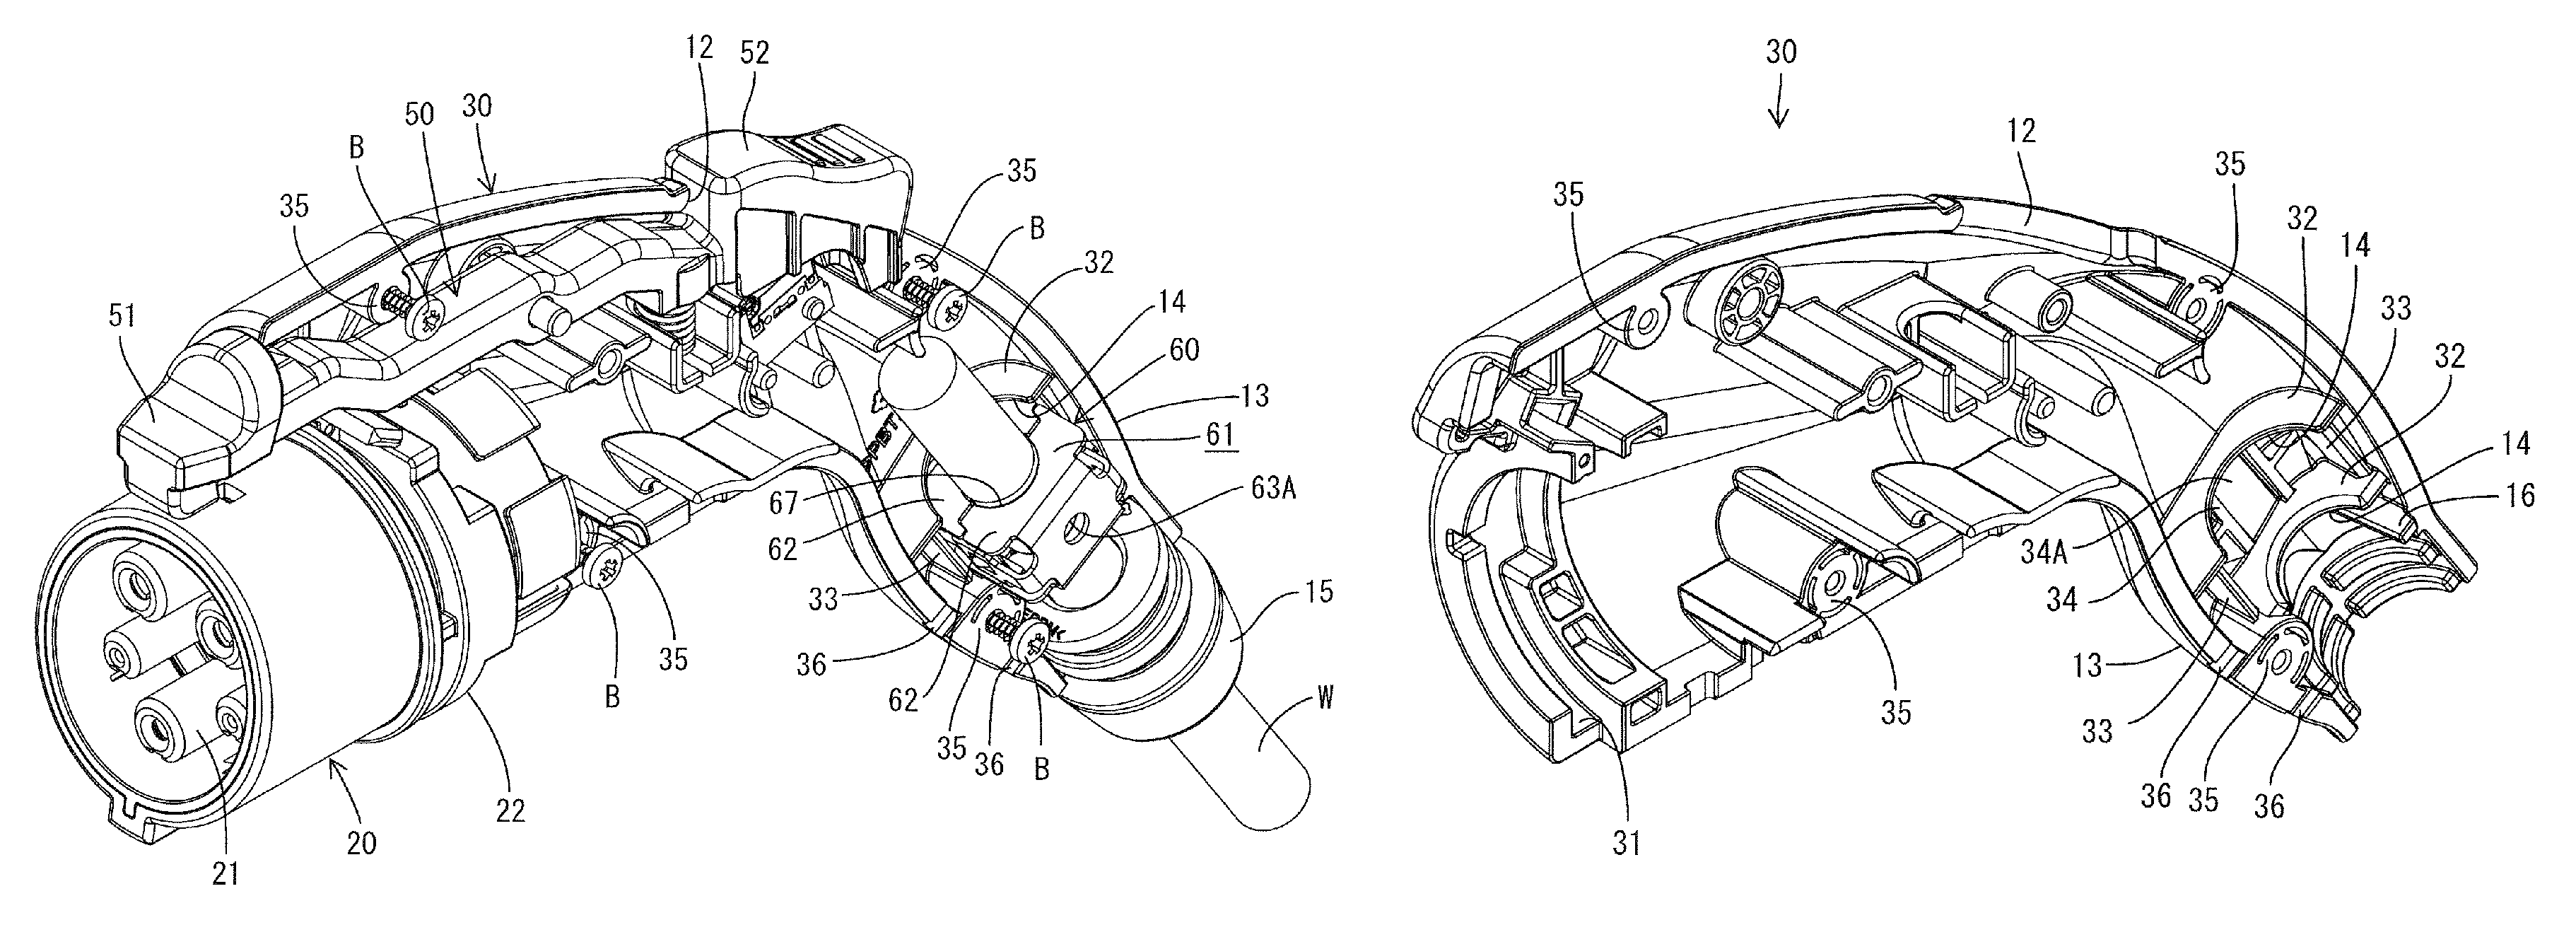 Self-locking wire holder mounted in a housing of a charging connector